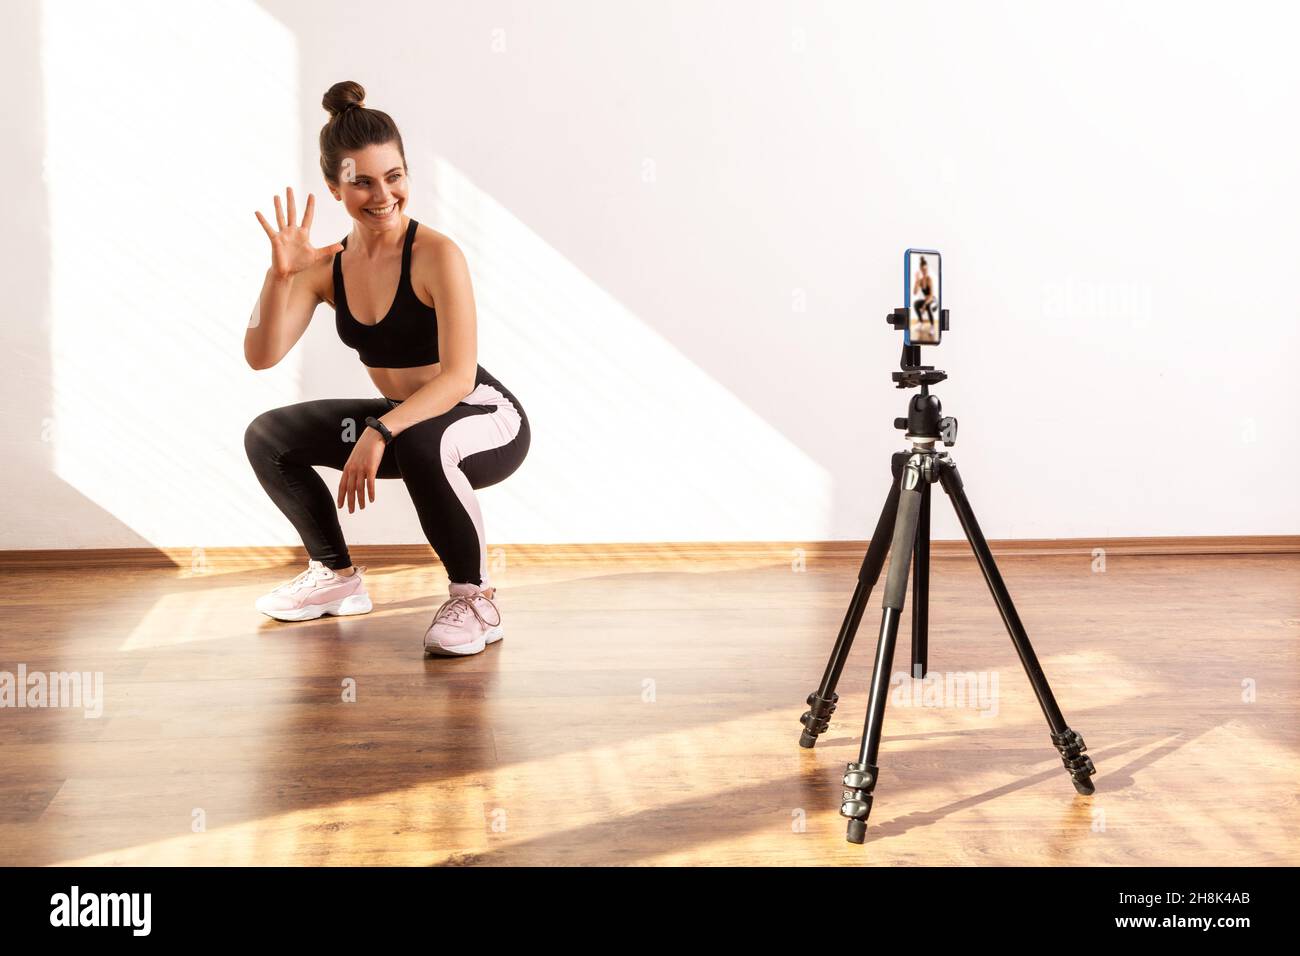 Coach recording video for her fitness vlog, squatting with followers, showing number of remaining, wearing black sports top and tights. Full length studio shot illuminated by sunlight from window. Stock Photo